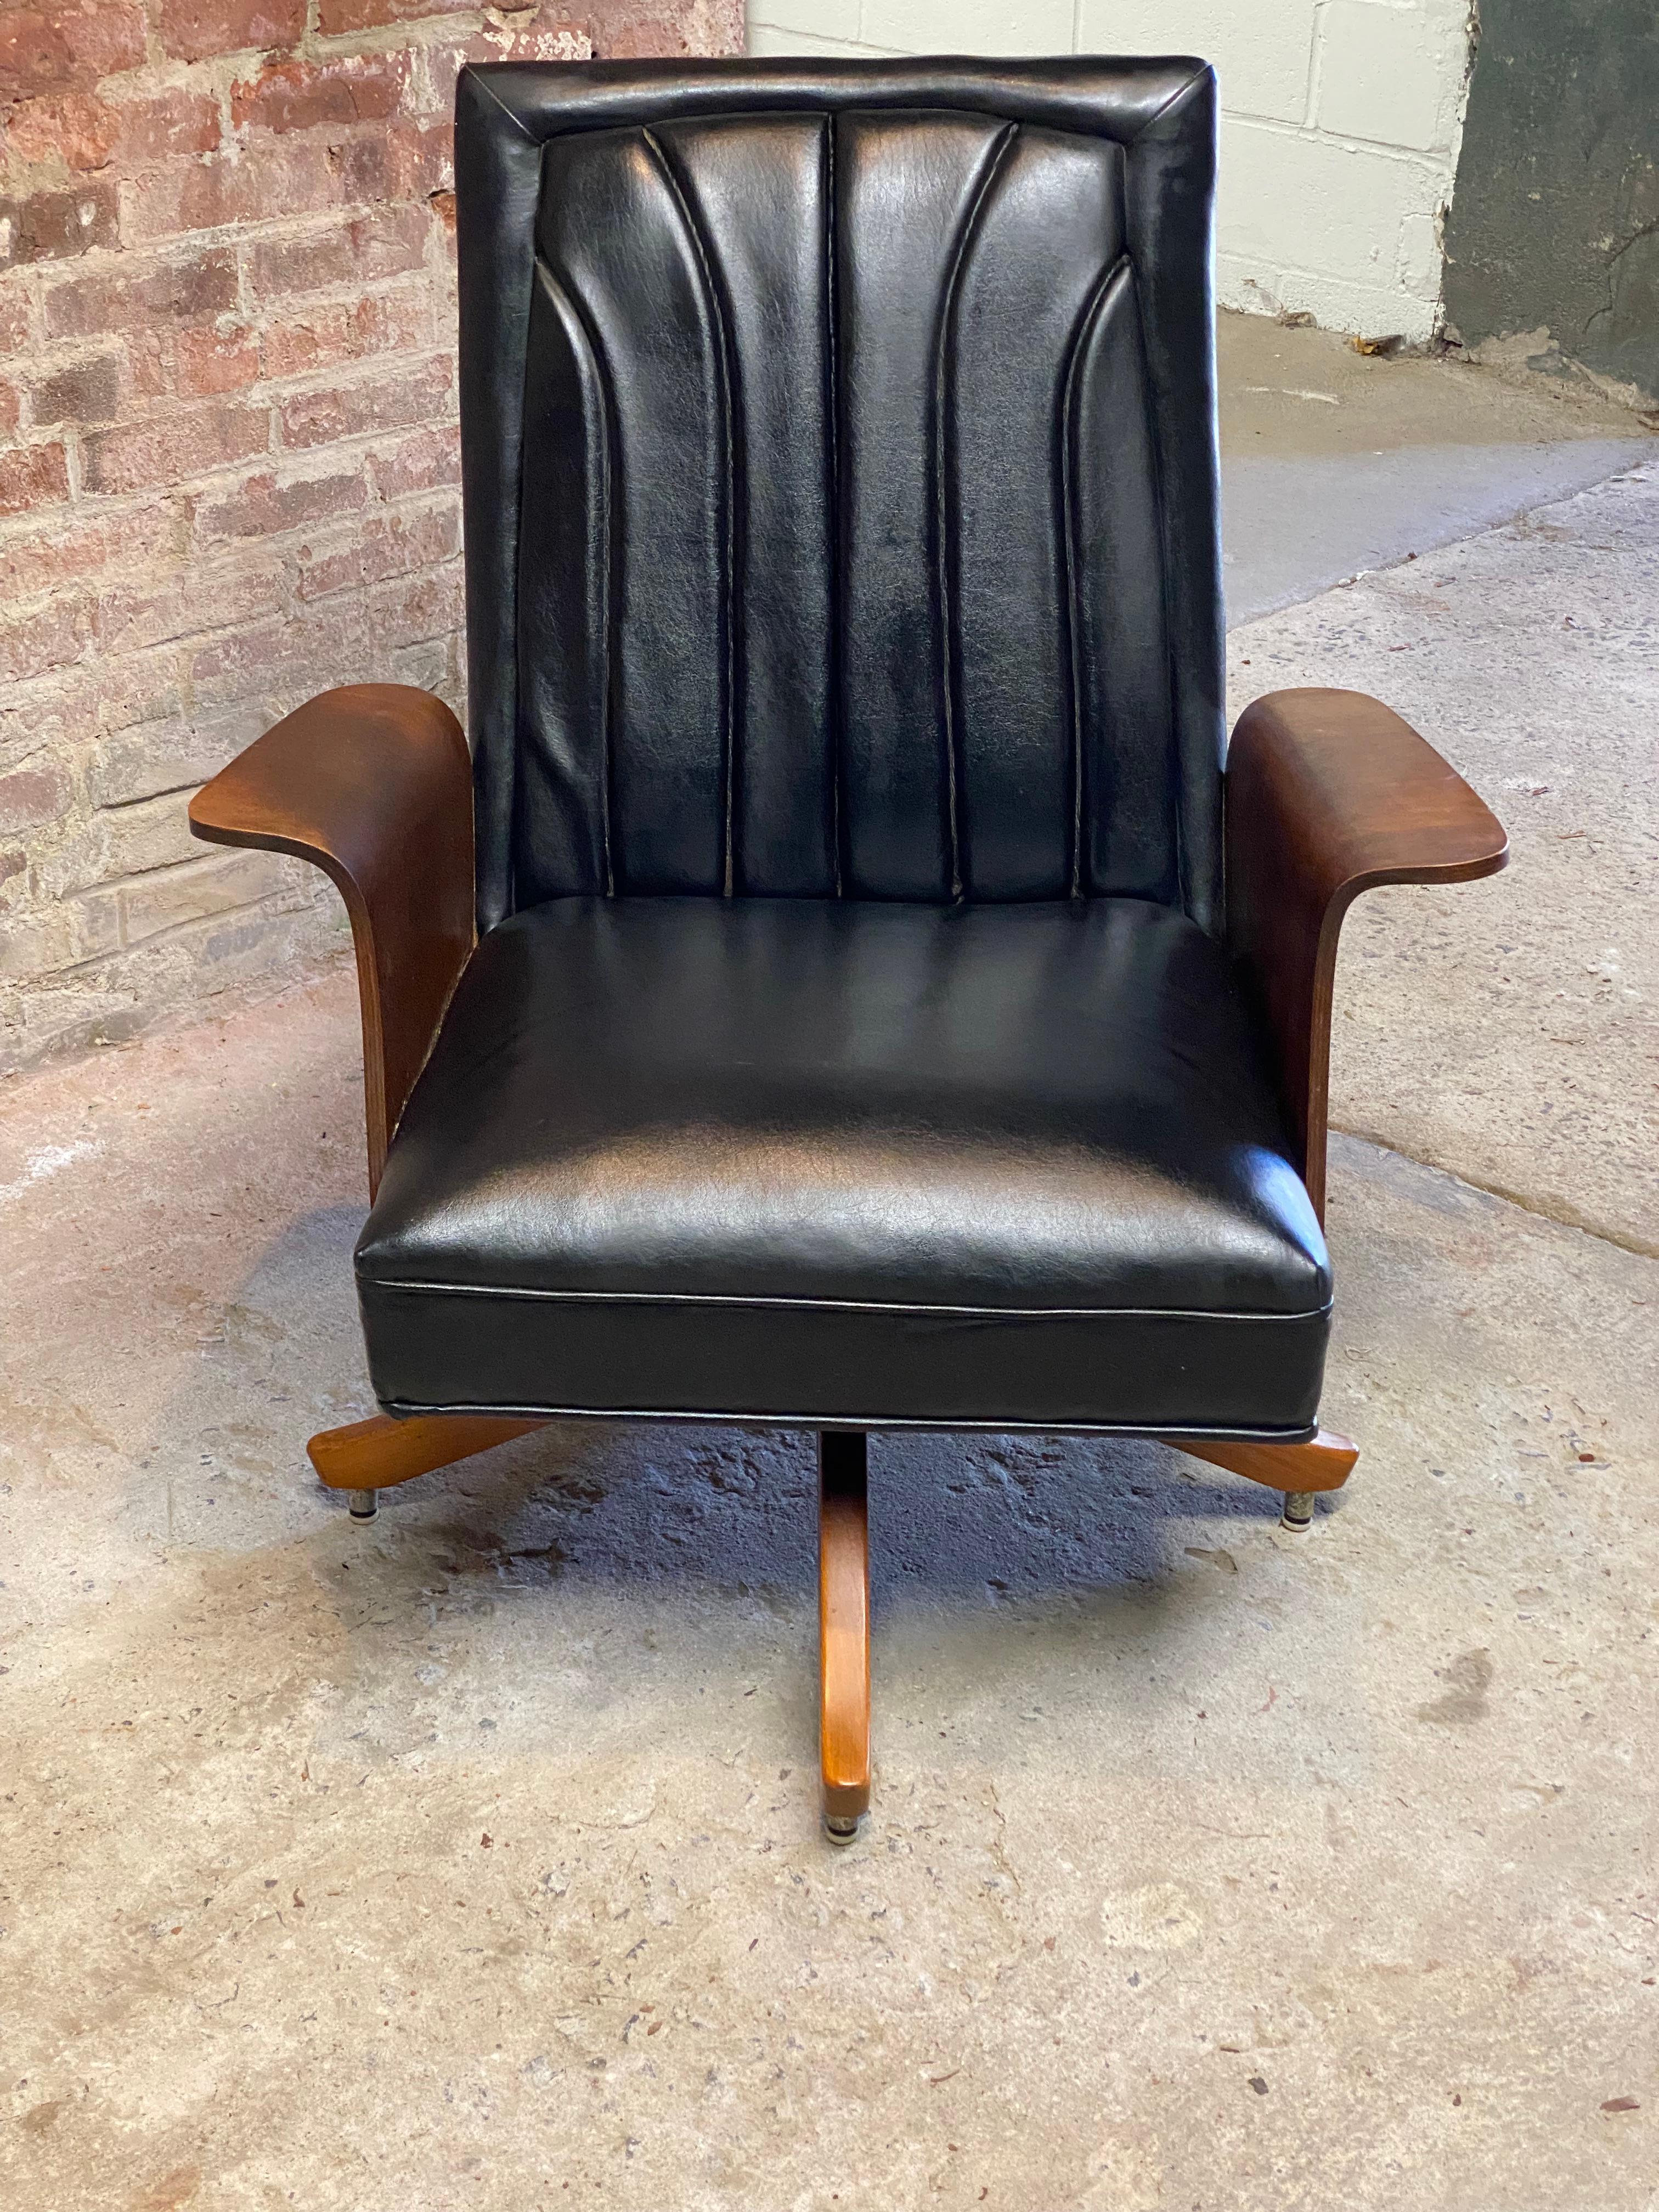 A nice black vinyl upholstered channeled back and walnut bentwood swivel lounge chair attributed to Miller Murphy, Inc. The chair swivels and has a relaxing little bounce action. Slightly curved and contoured wood legs. Comfortable and distinct.